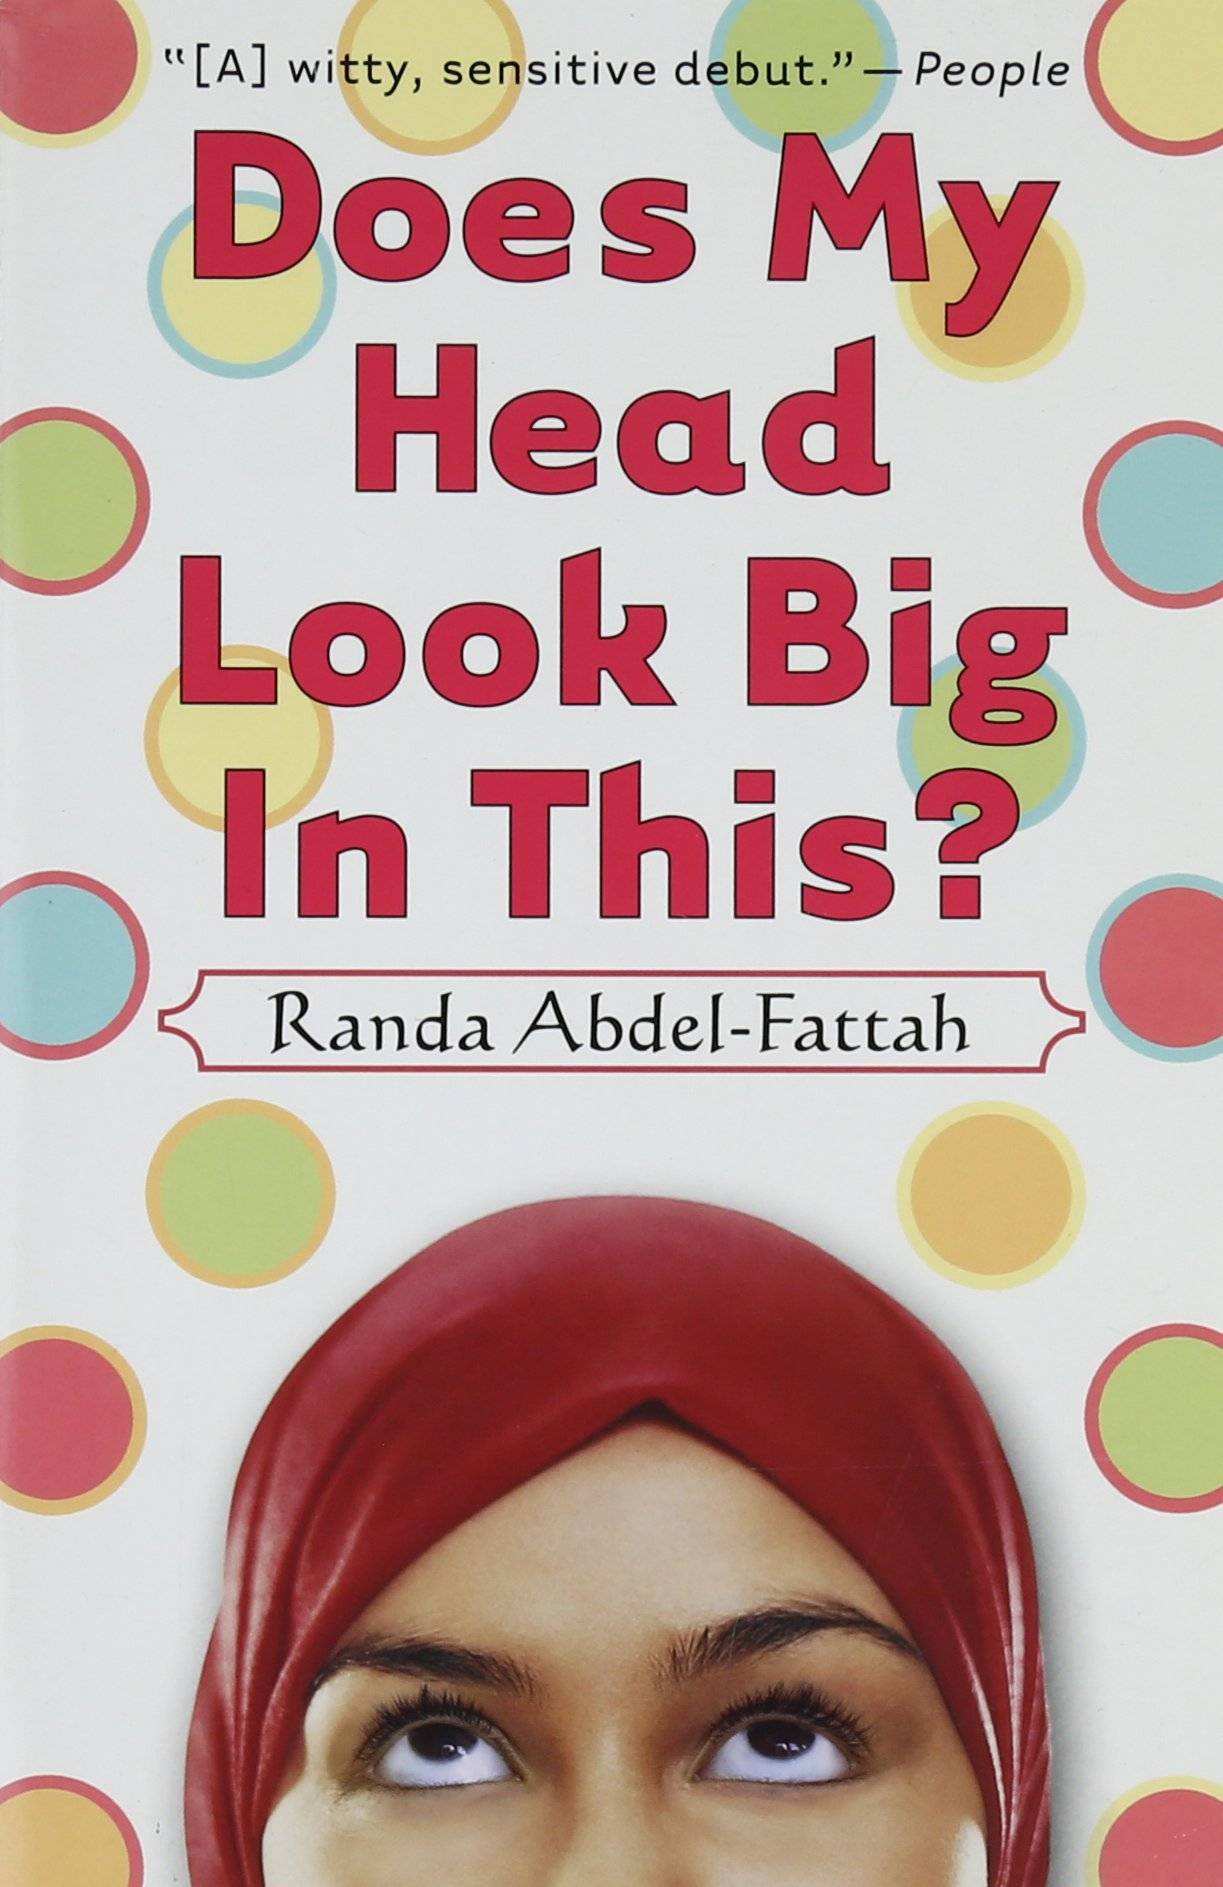 Polka dot book cover with image of a figure wearing a hijab looking up at the title text